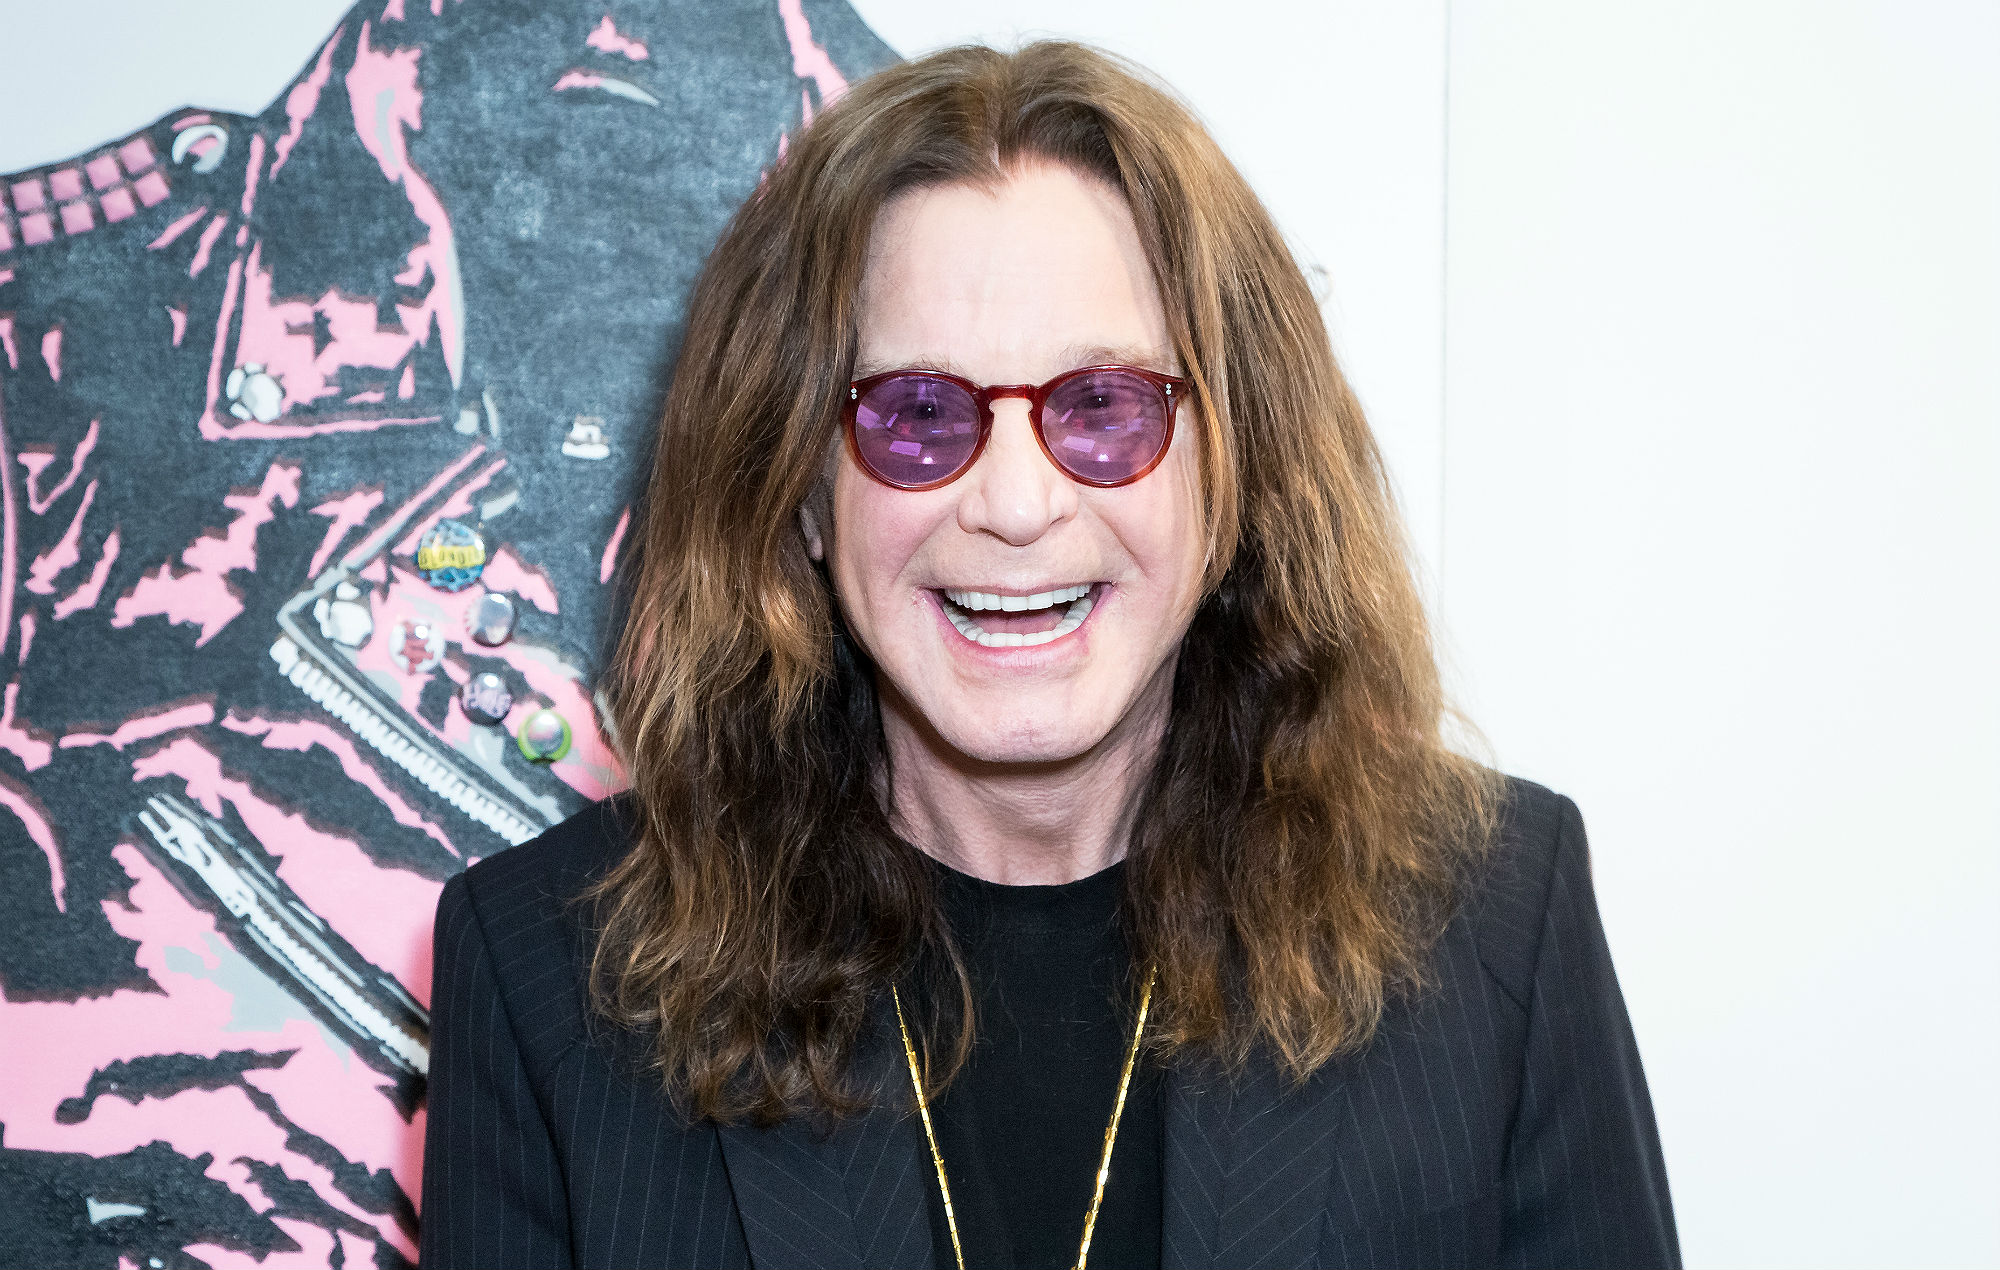 The legendary Ozzy Osbourne, known for his iconic heavy metal music, has recorded a new album set to be released this January